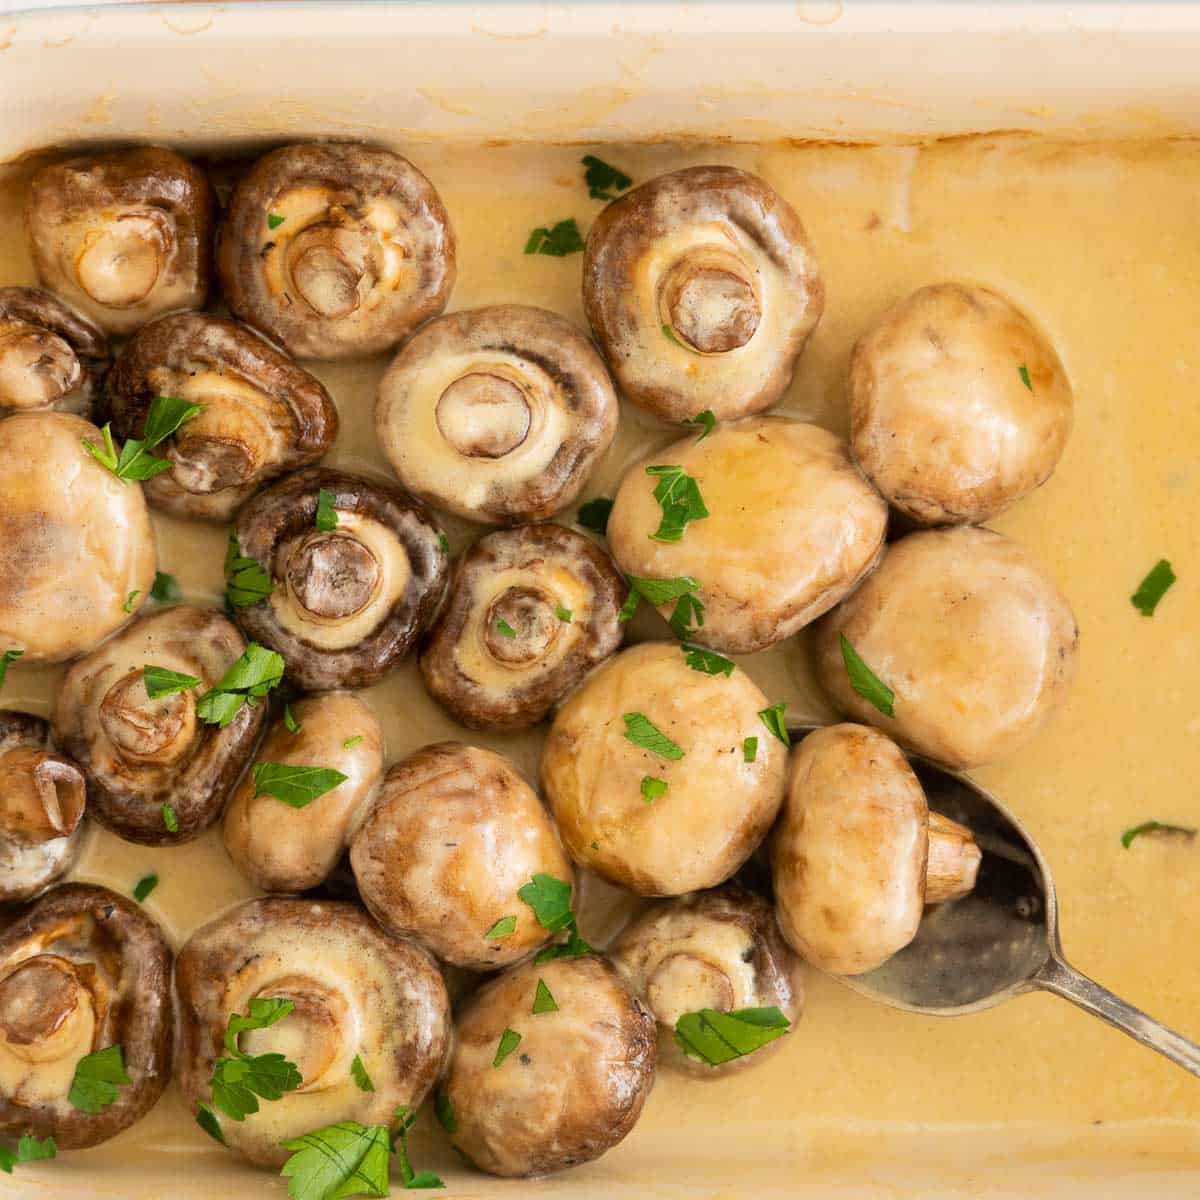 Mushrooms in a creamy sauce garnished with chopped parsley.